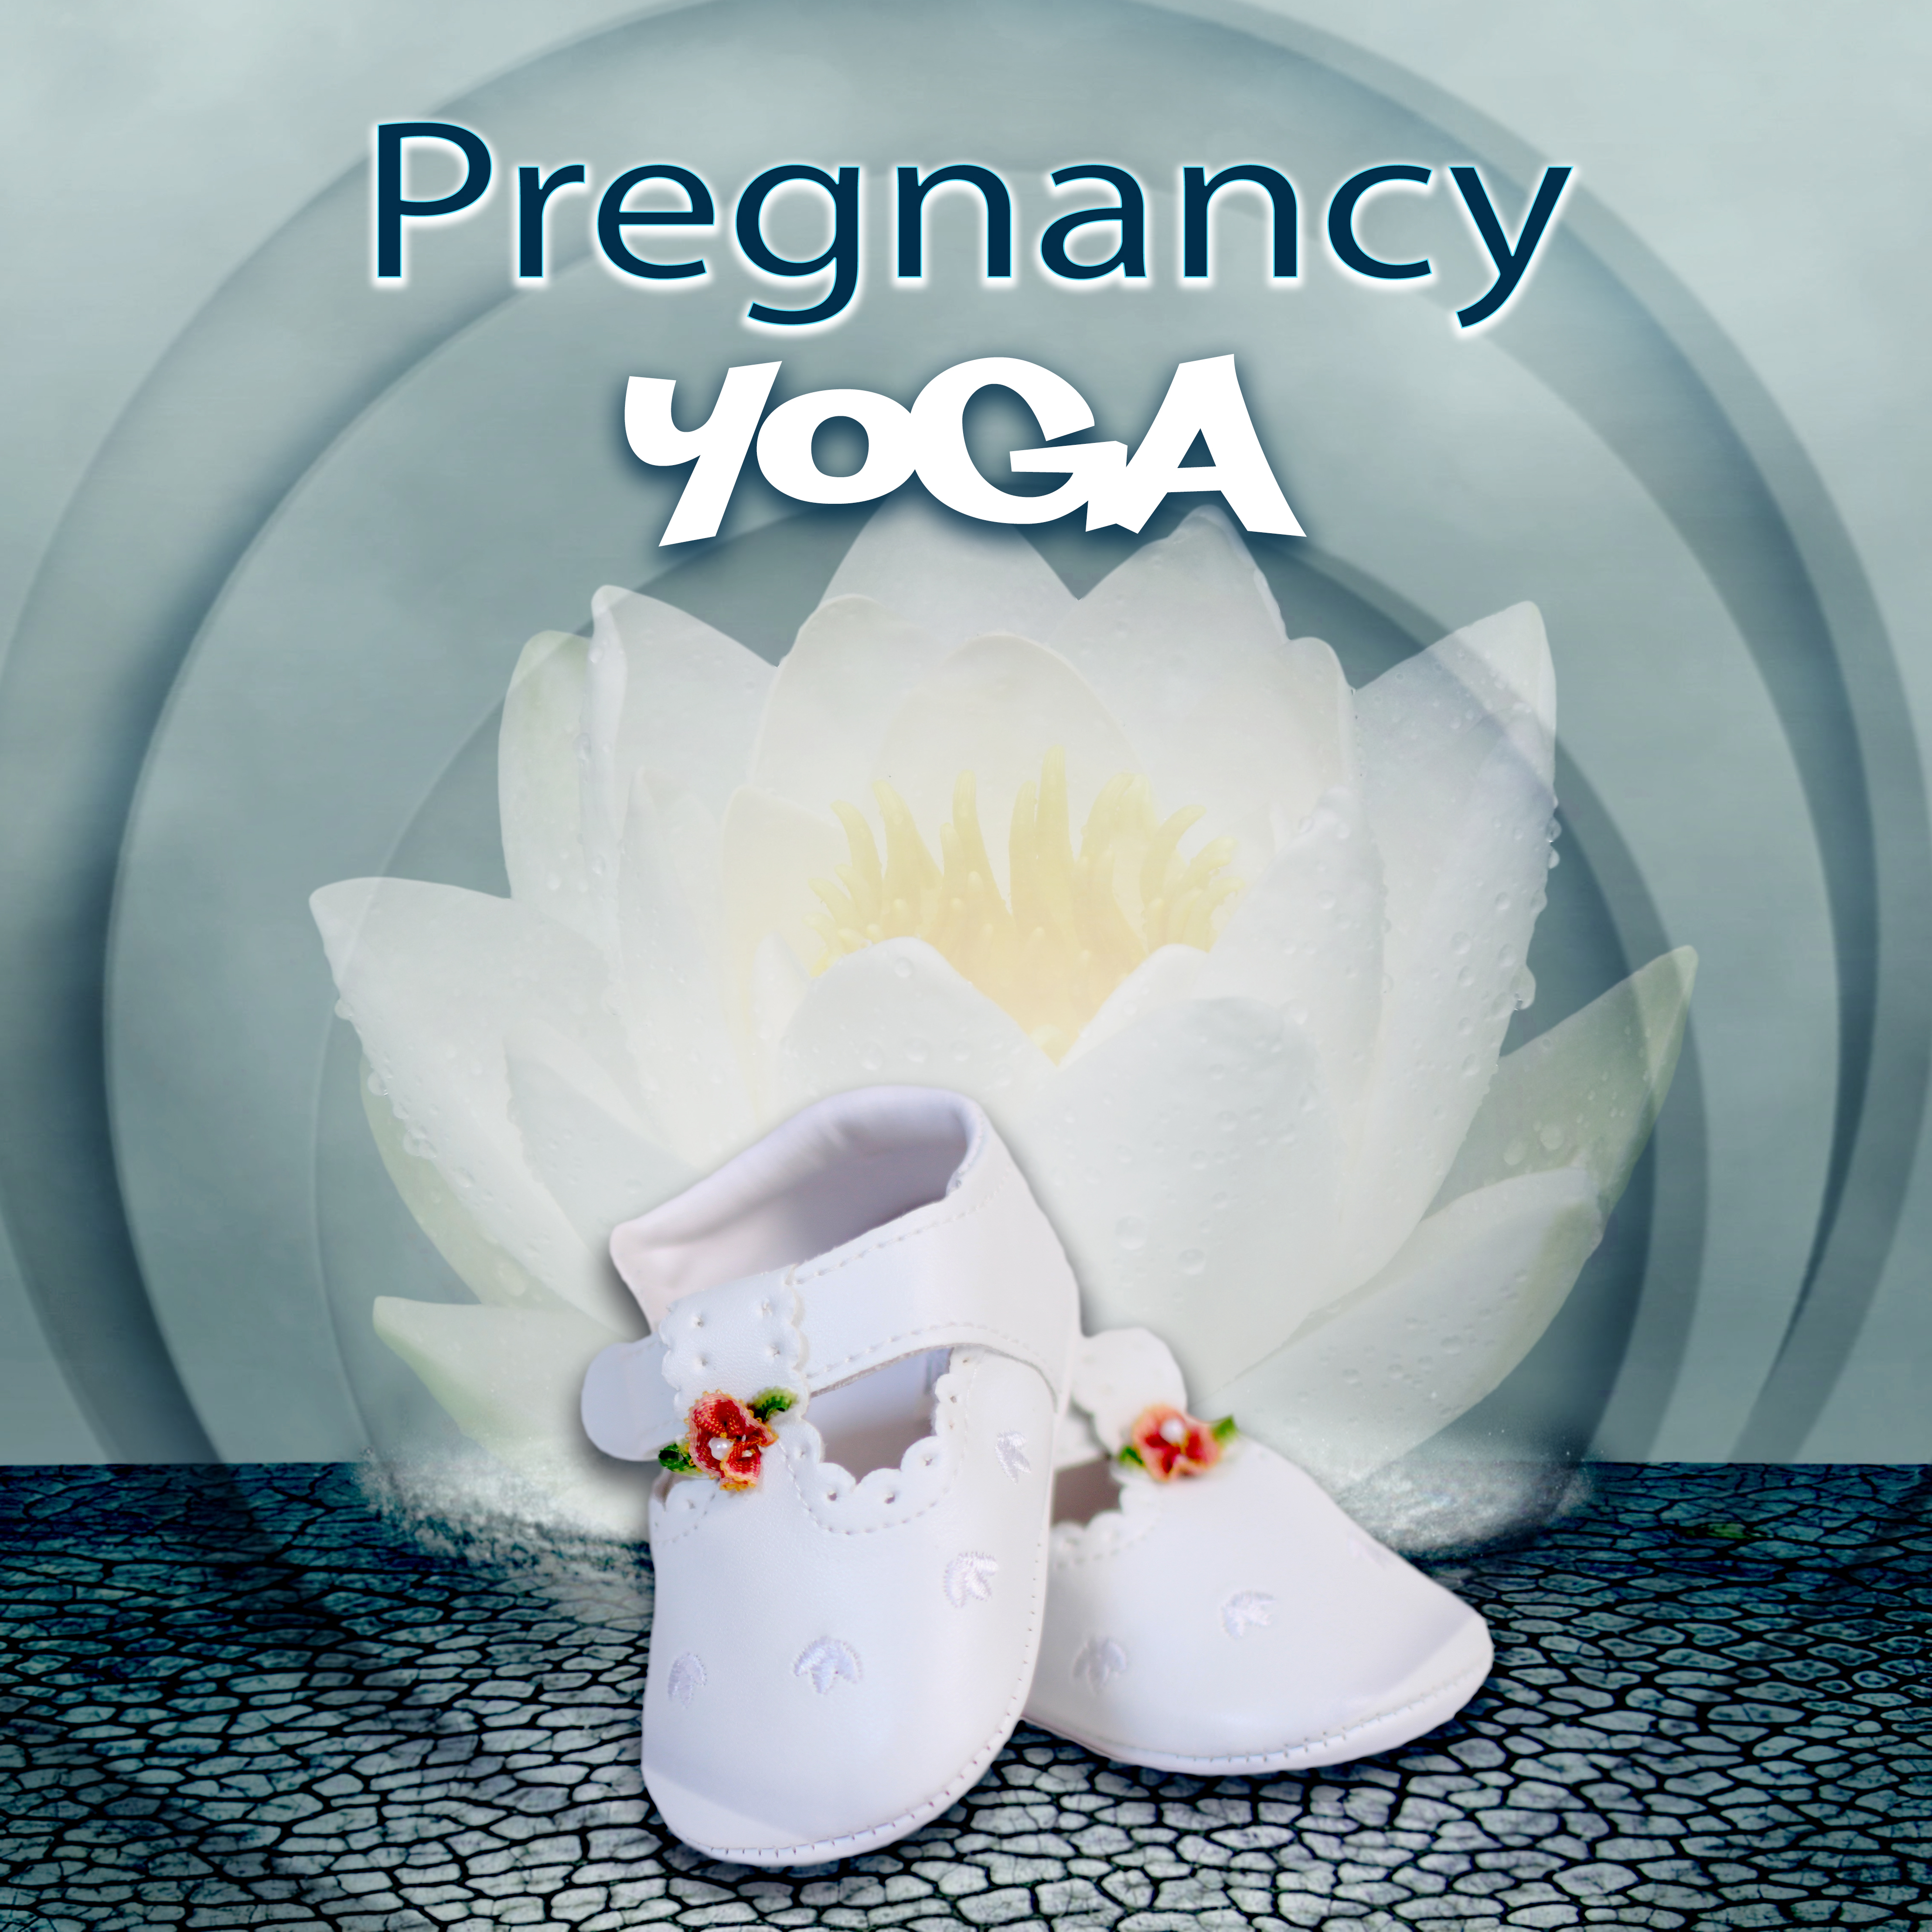 Pregnancy Yoga  Relaxing Music for Pregnant to Exercise at Home, Pilates  Yoga Poses for Strength, Health and Fitness, Home Spa Relaxation, Prenatal Yoga for Easier Childbirth and Delivery